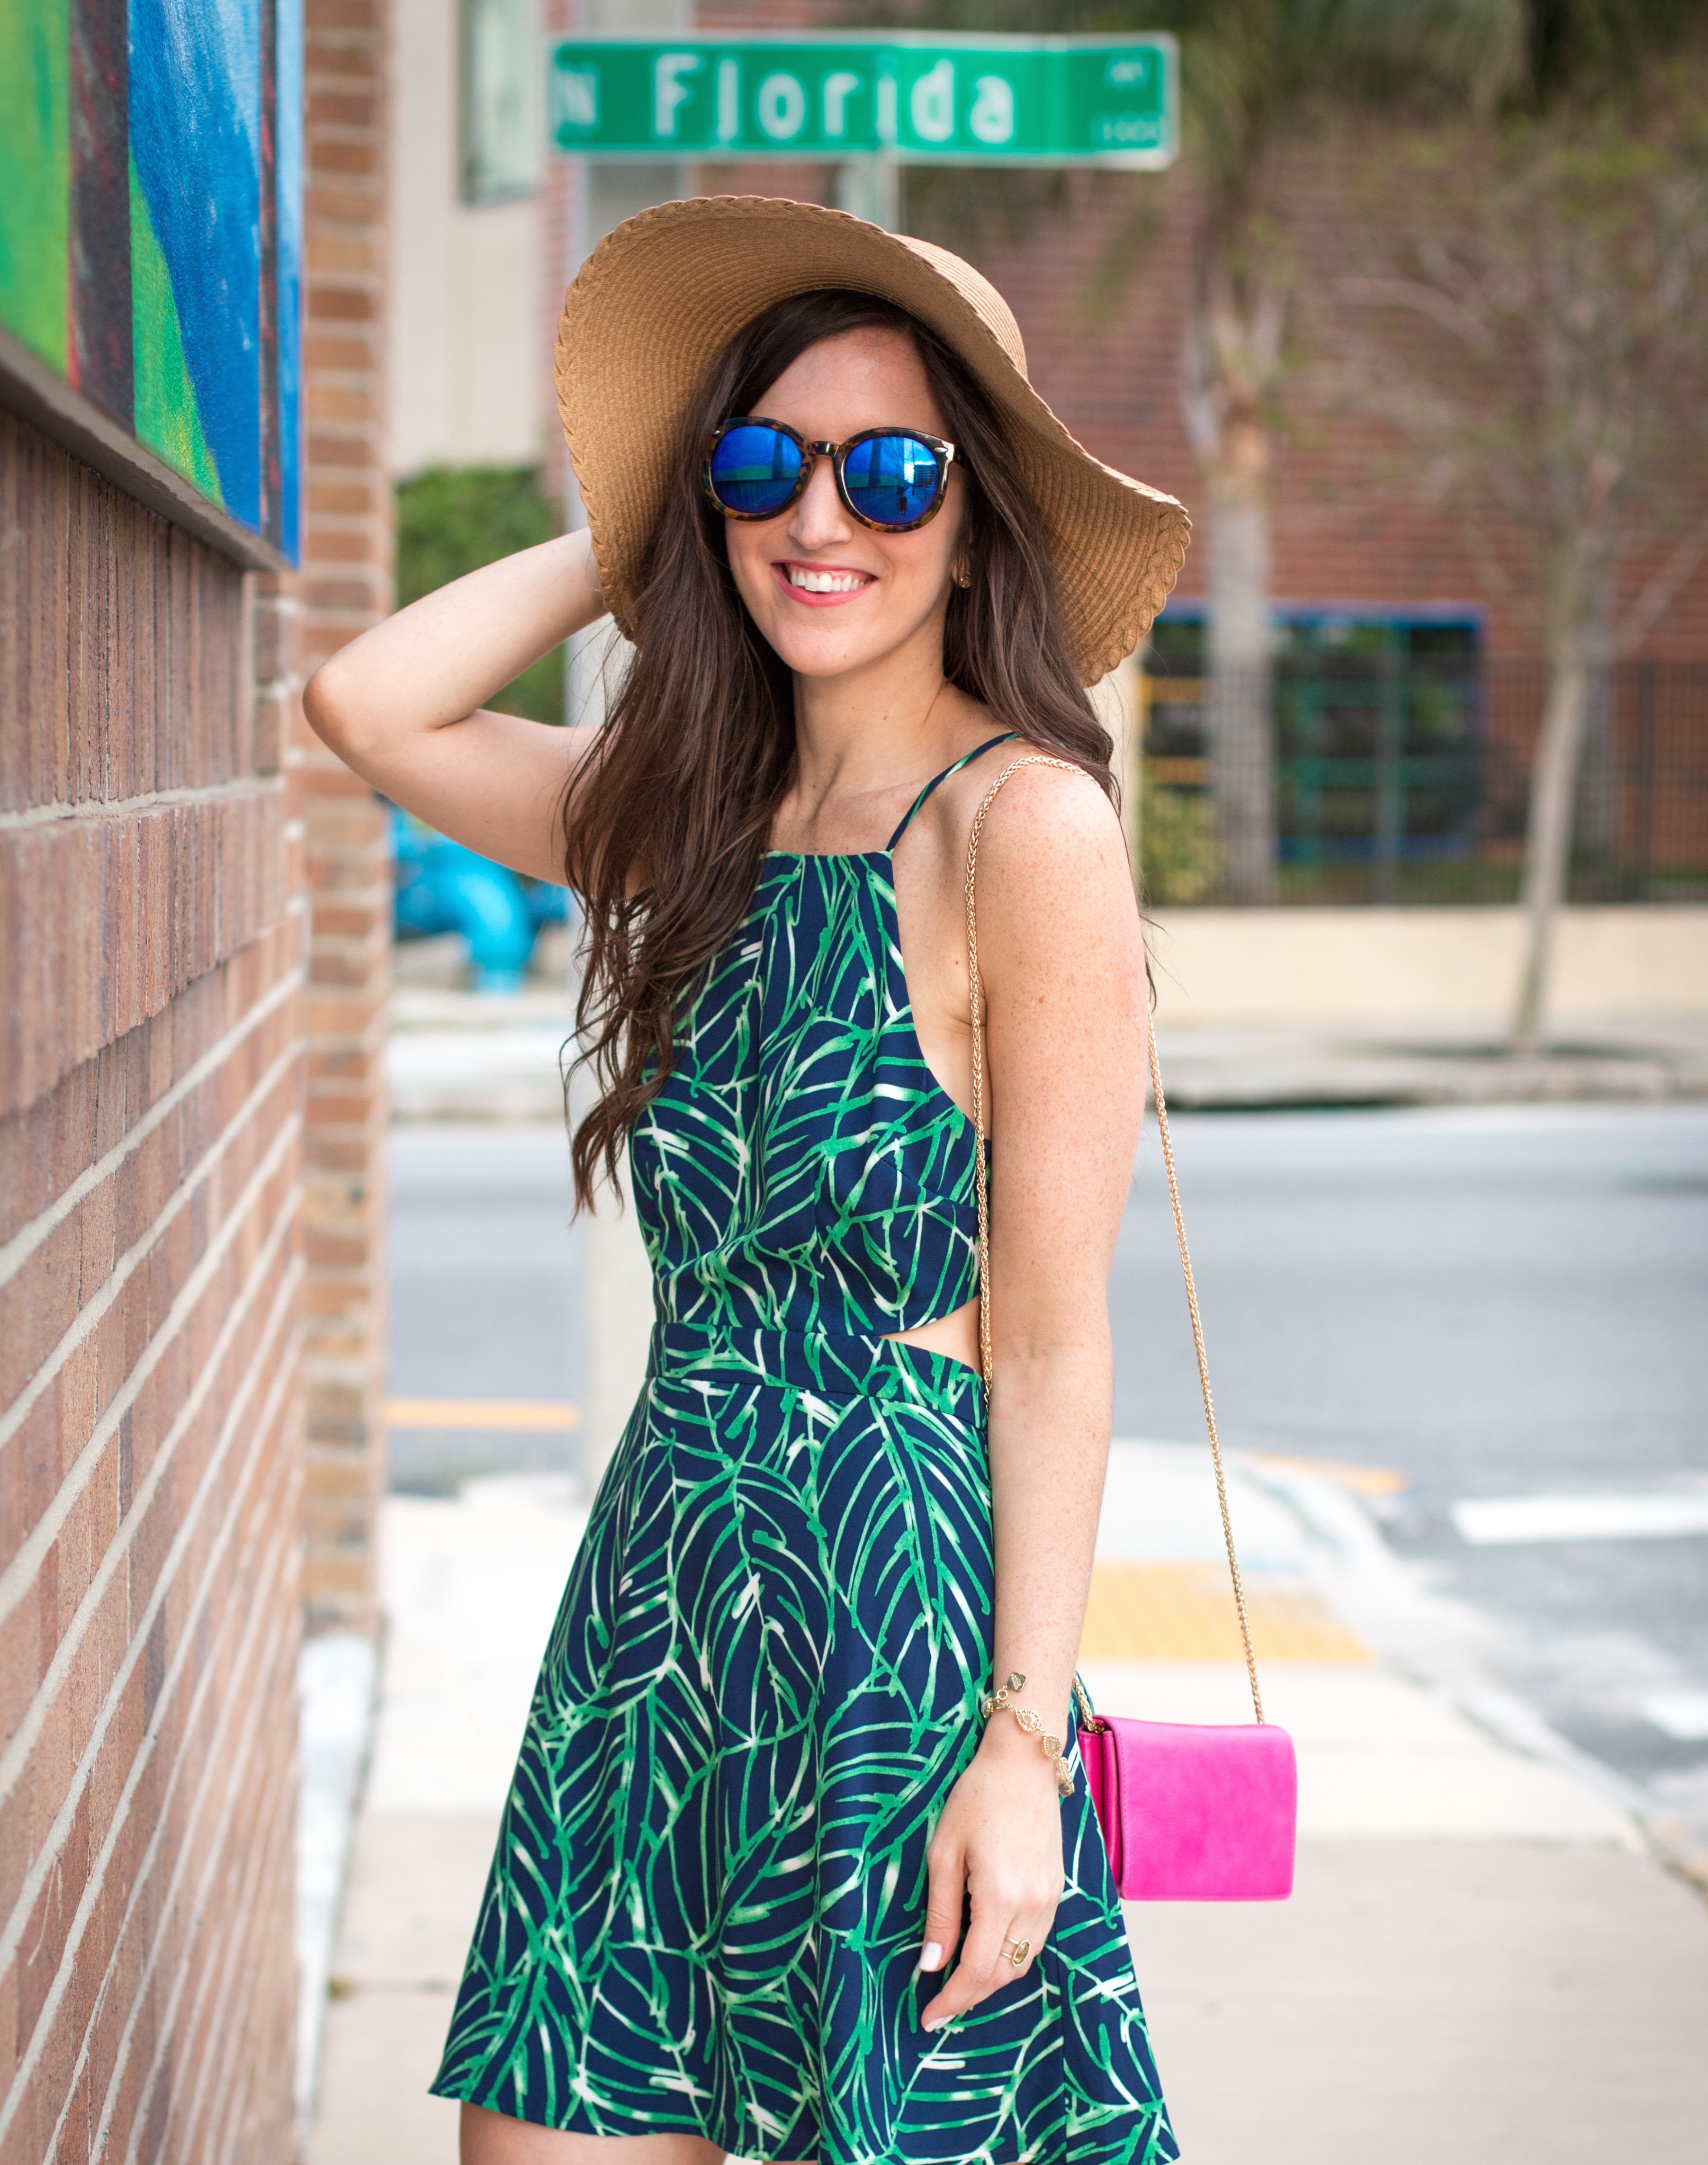 Toasting: cut out dress + straw hat - Hosting & ToastingHosting & Toasting